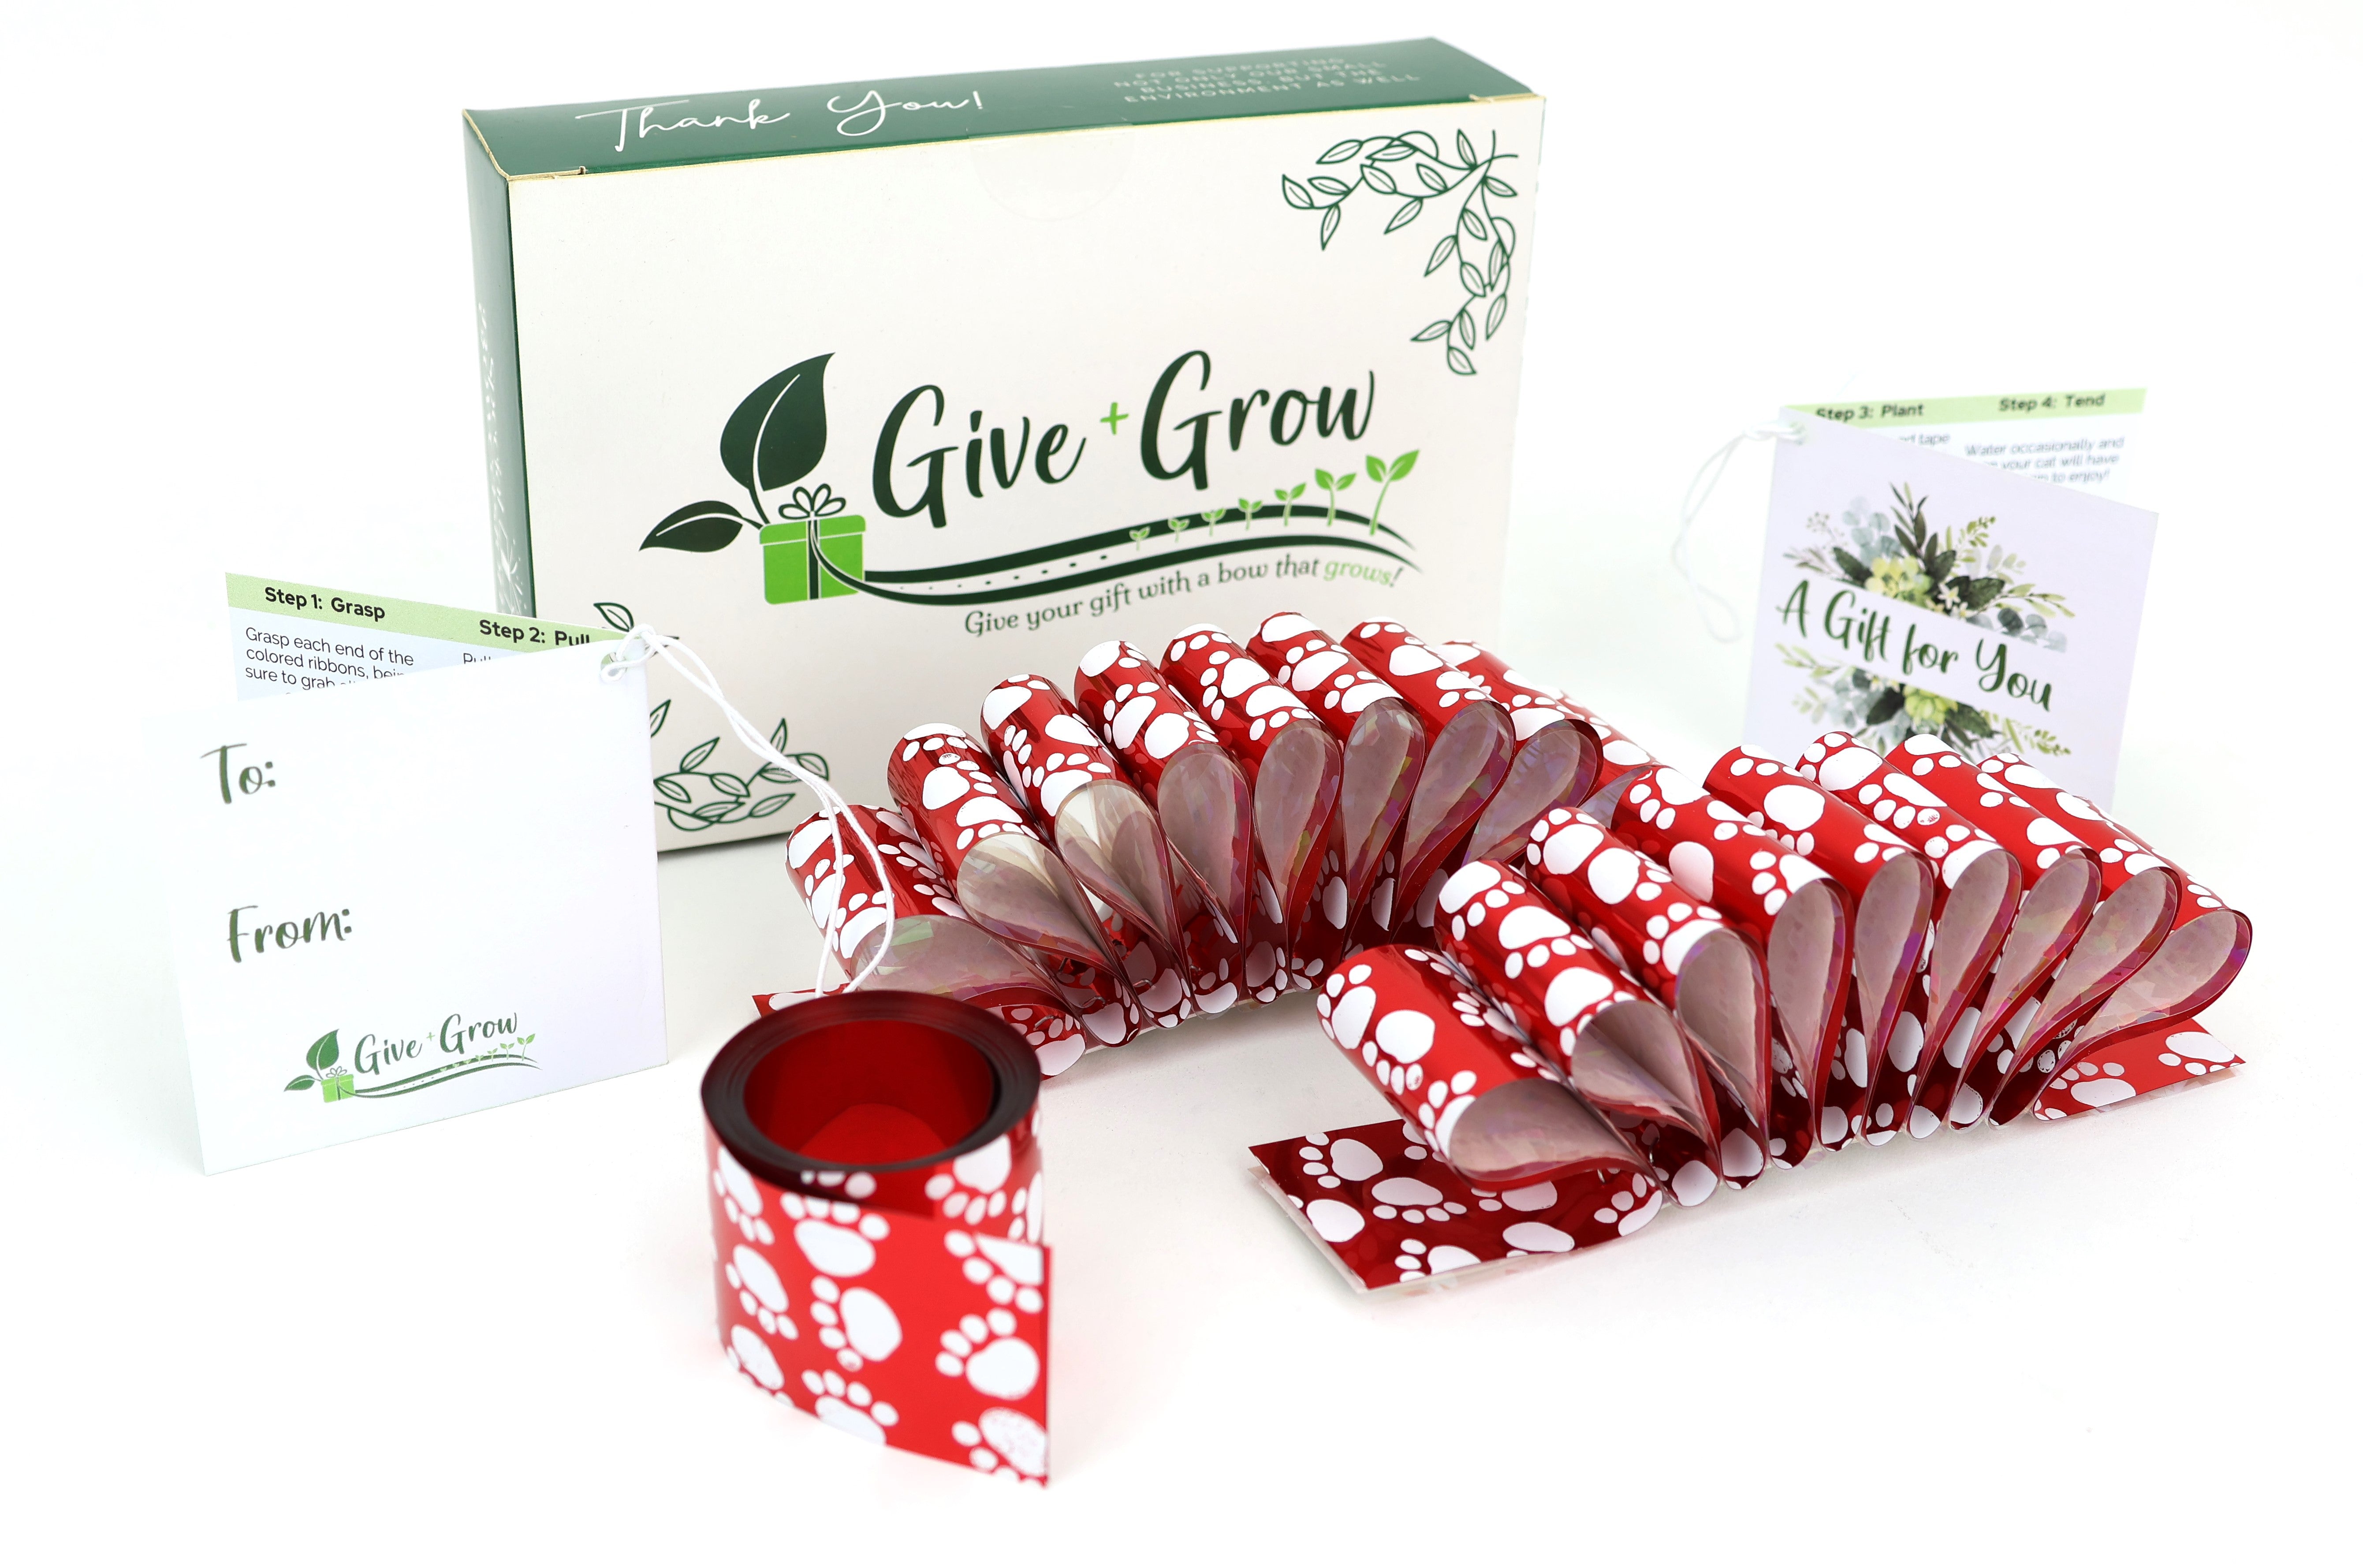 CATNIP Bundle: (2) WAVE Give+Grow BOWS with 3 feet of Plantable CATNIP seed tape with Paw Print Ribbon, To/From Tags